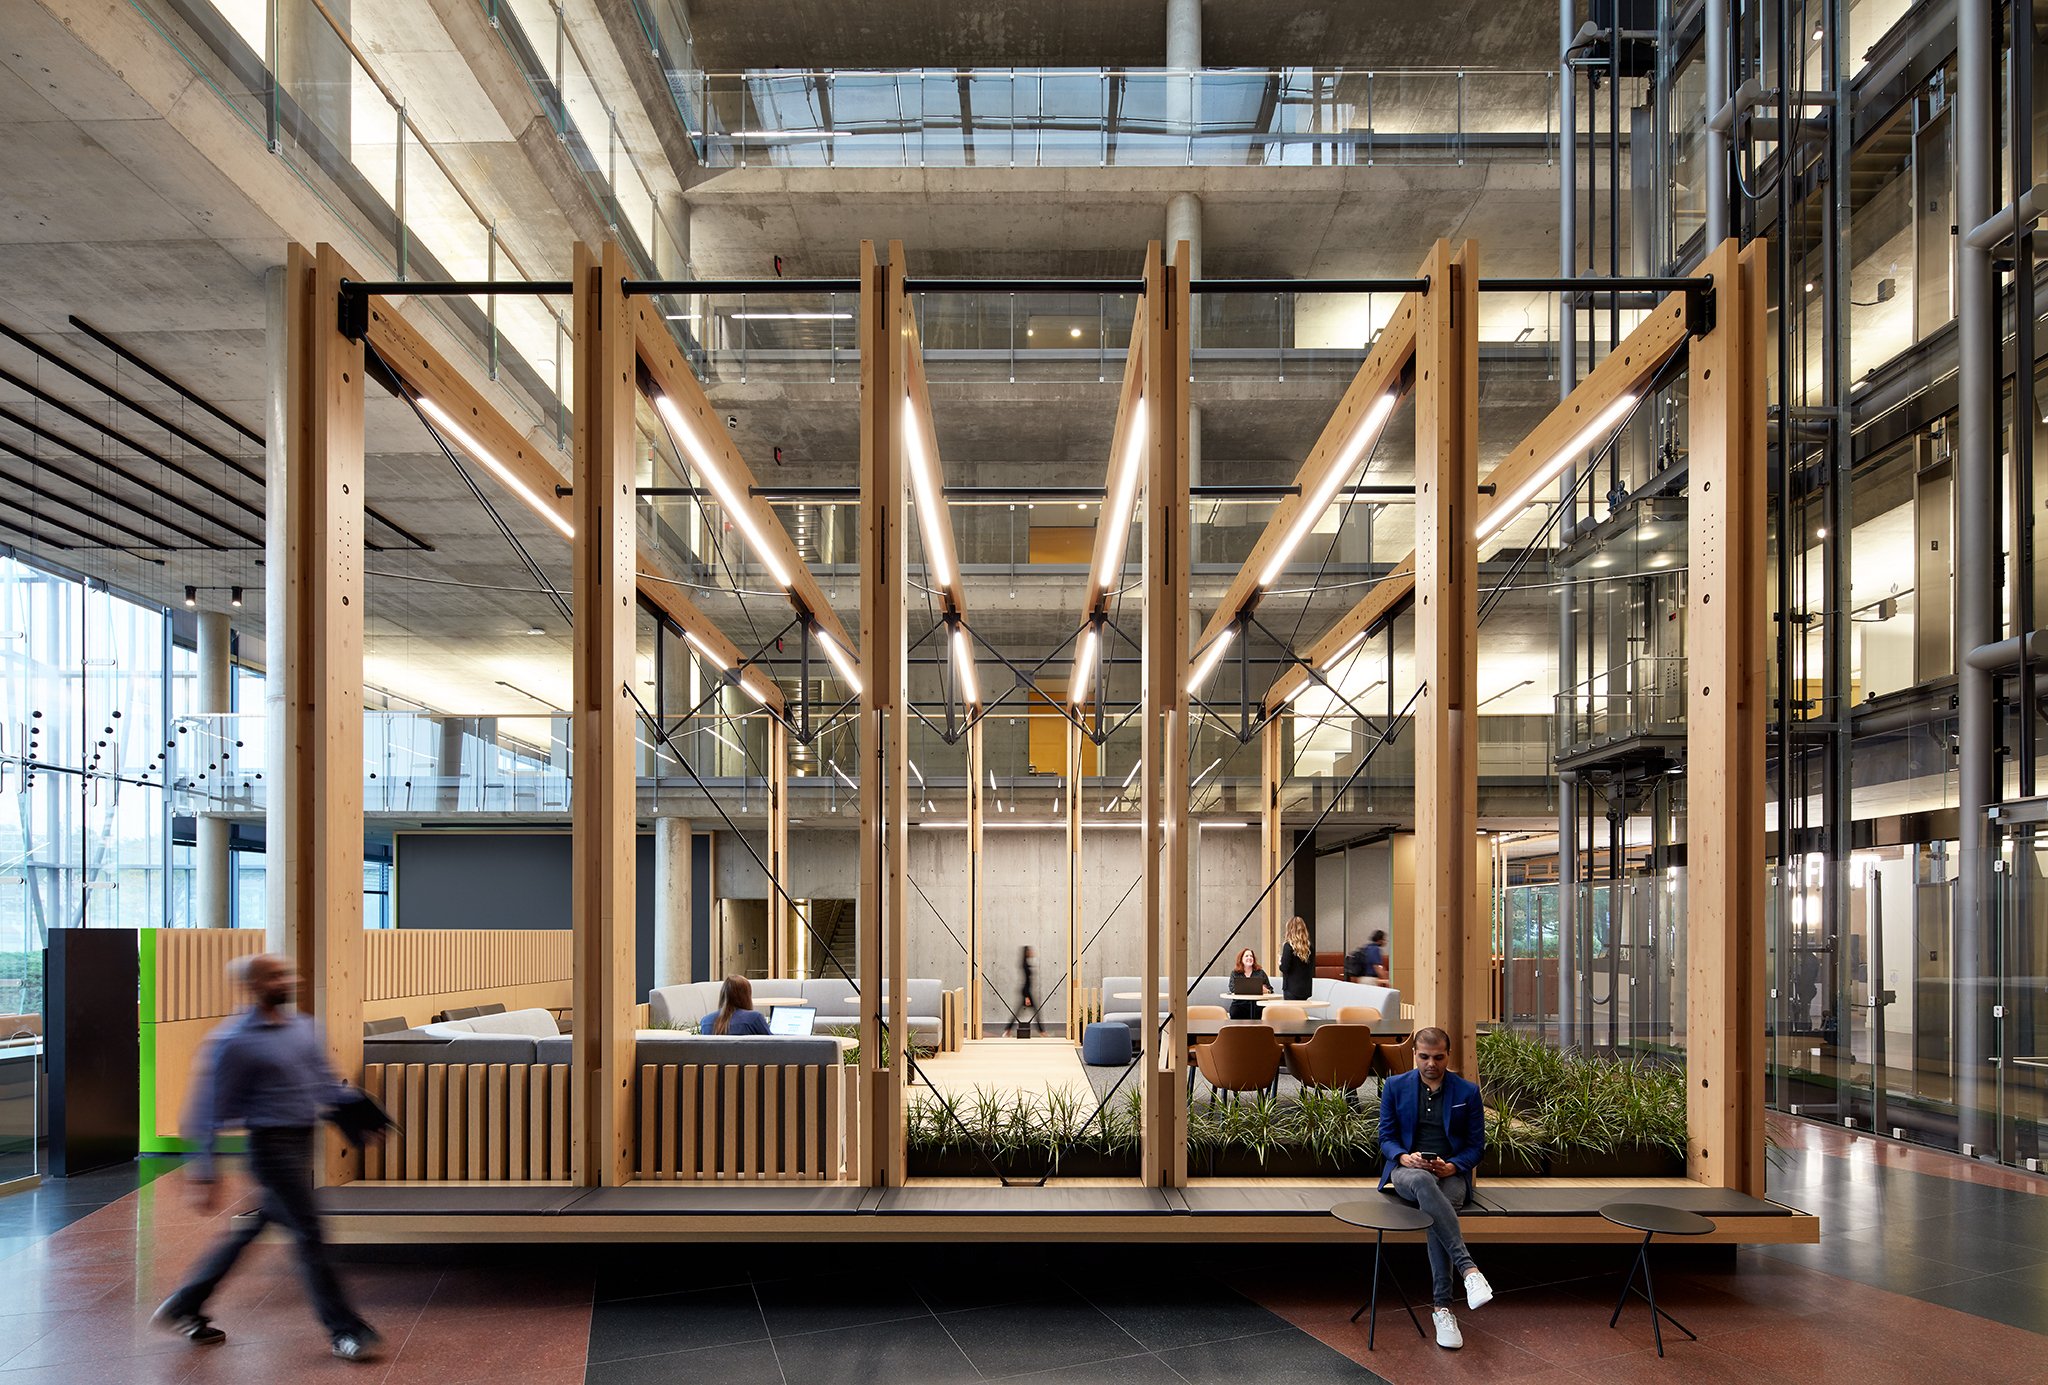  AWARDS  AIA Chicago, Interior Architecture, Citation of Merit,  2022    Corporate Office  Perkins+Will  Niles, IL     Steve Hall  